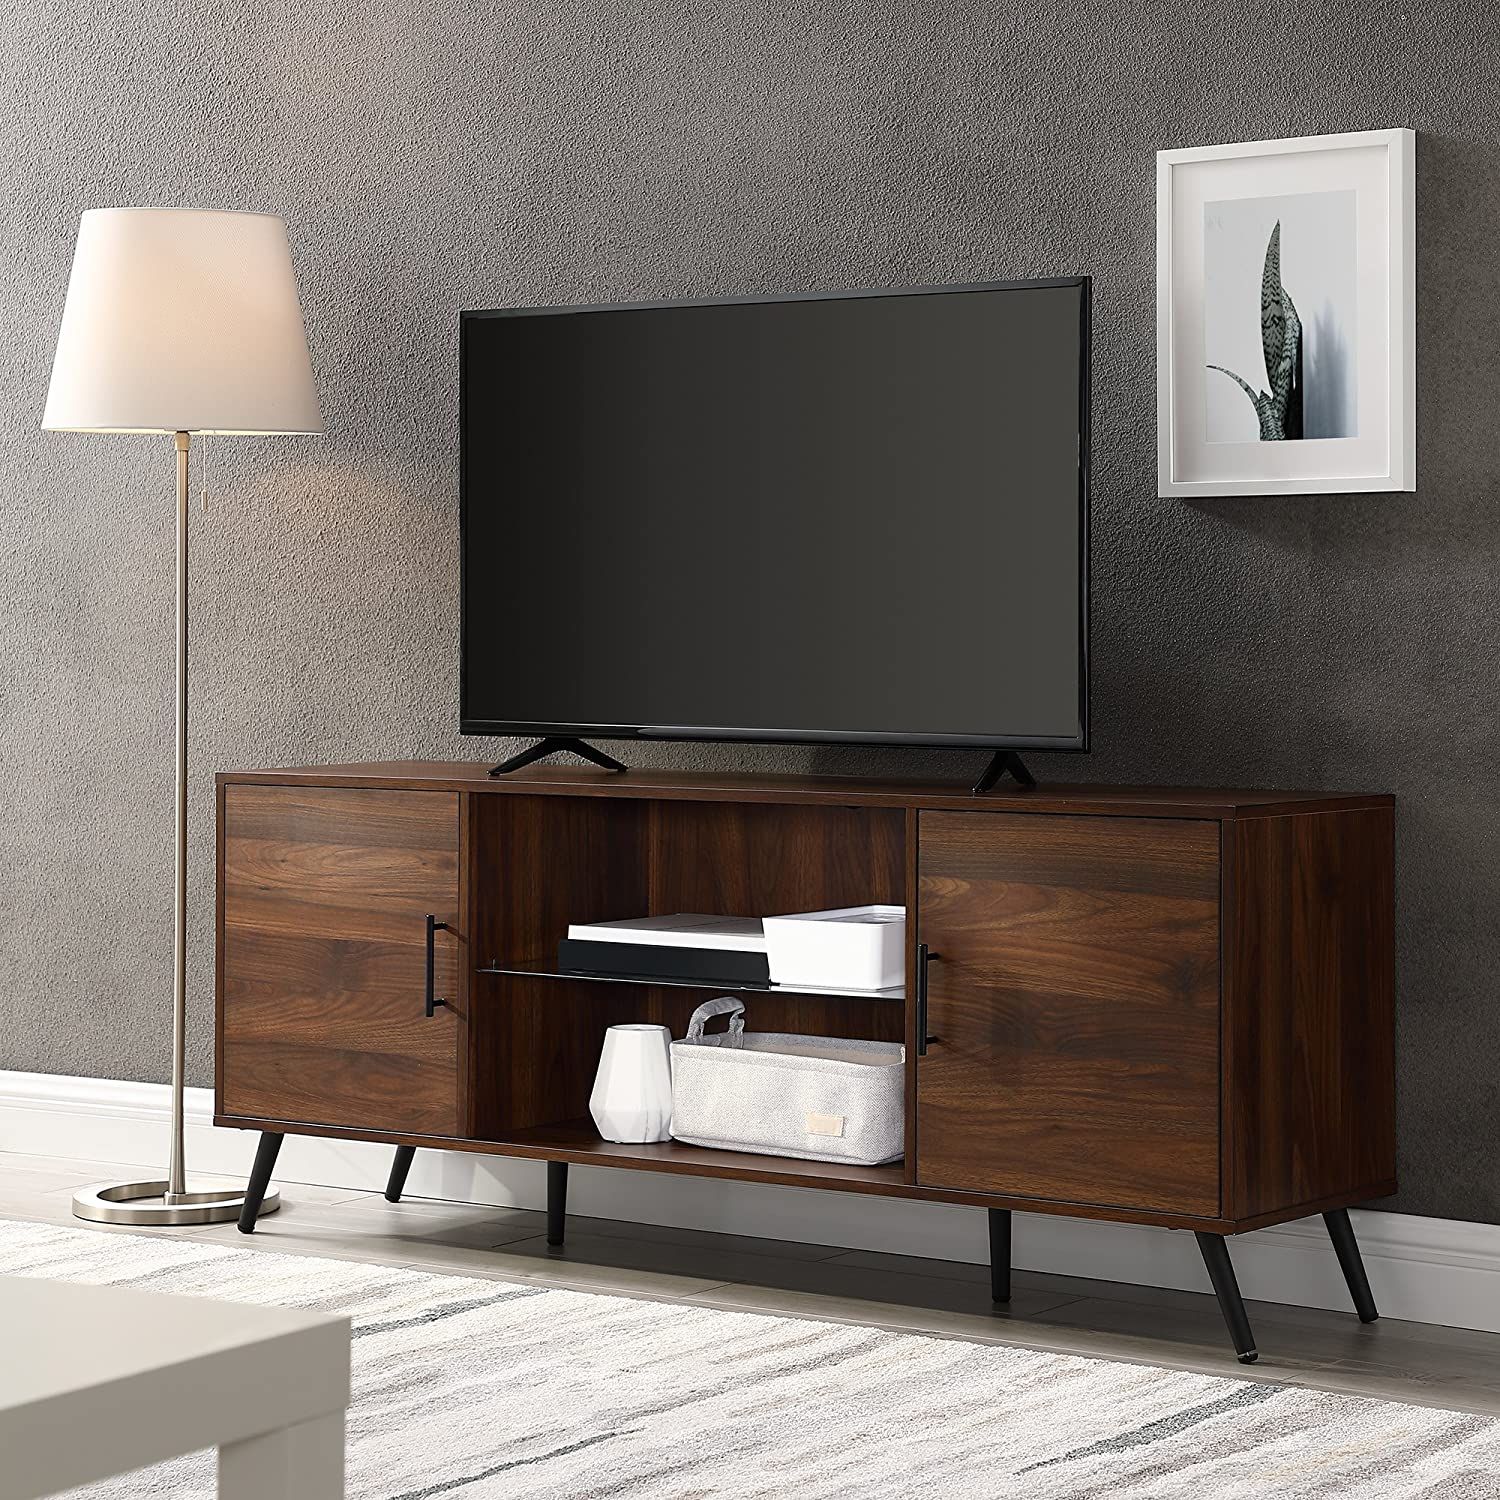 The Best Tv Stands To House Your Home Entertainment – Bob Vila With Oaklee Tv Stands (Gallery 9 of 20)